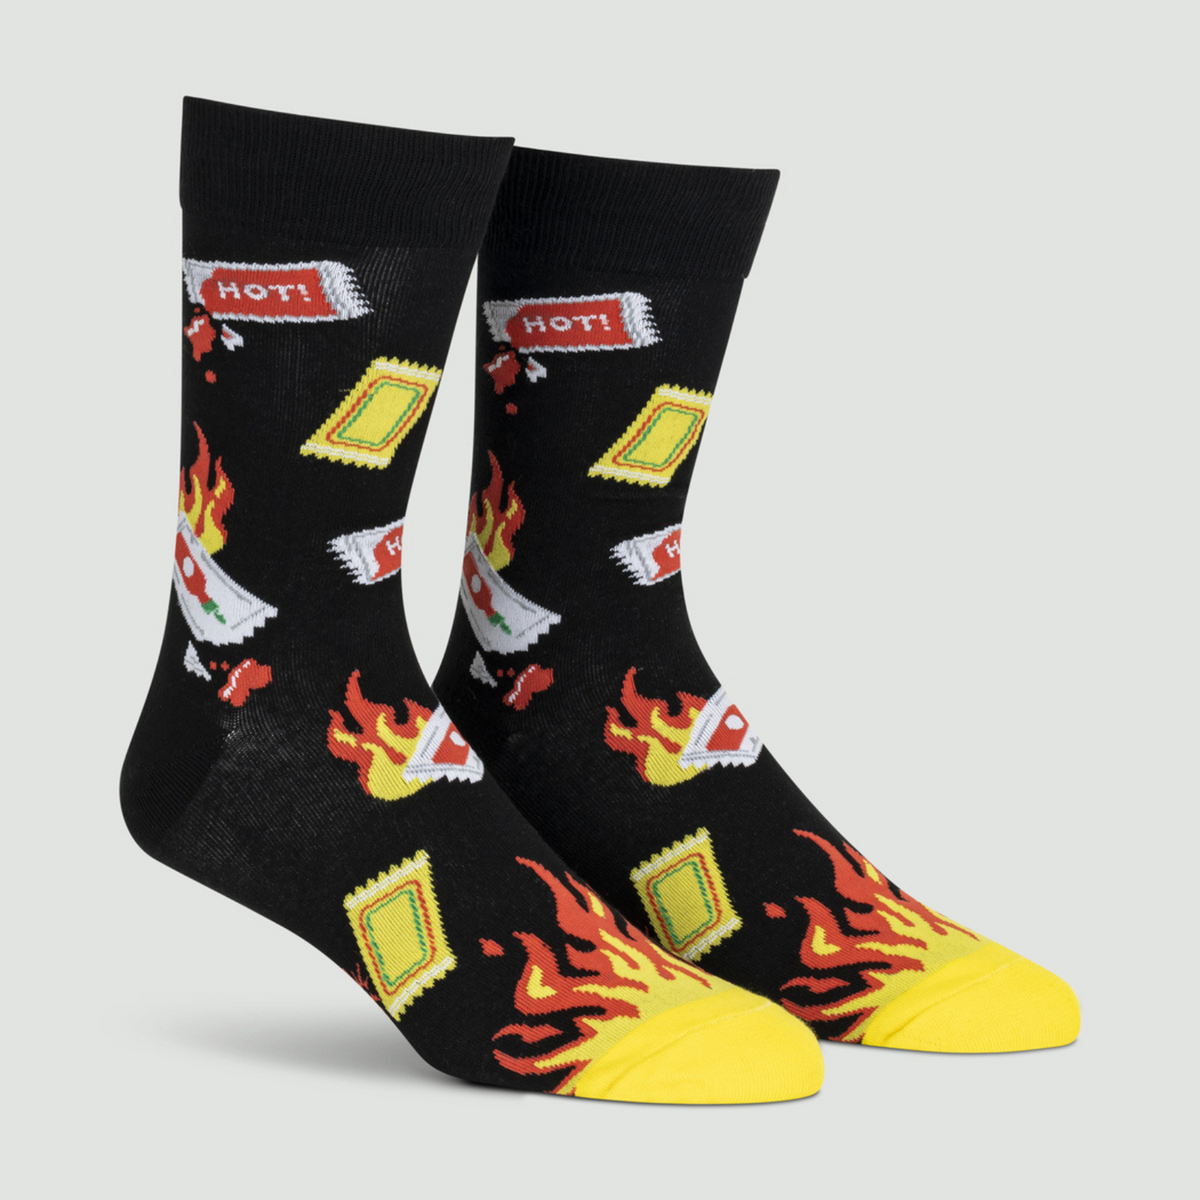 Sock It To Me Extra Hot men&#39;s sock featuring black crew sock with hot sauce packets and flames at toes on display feet